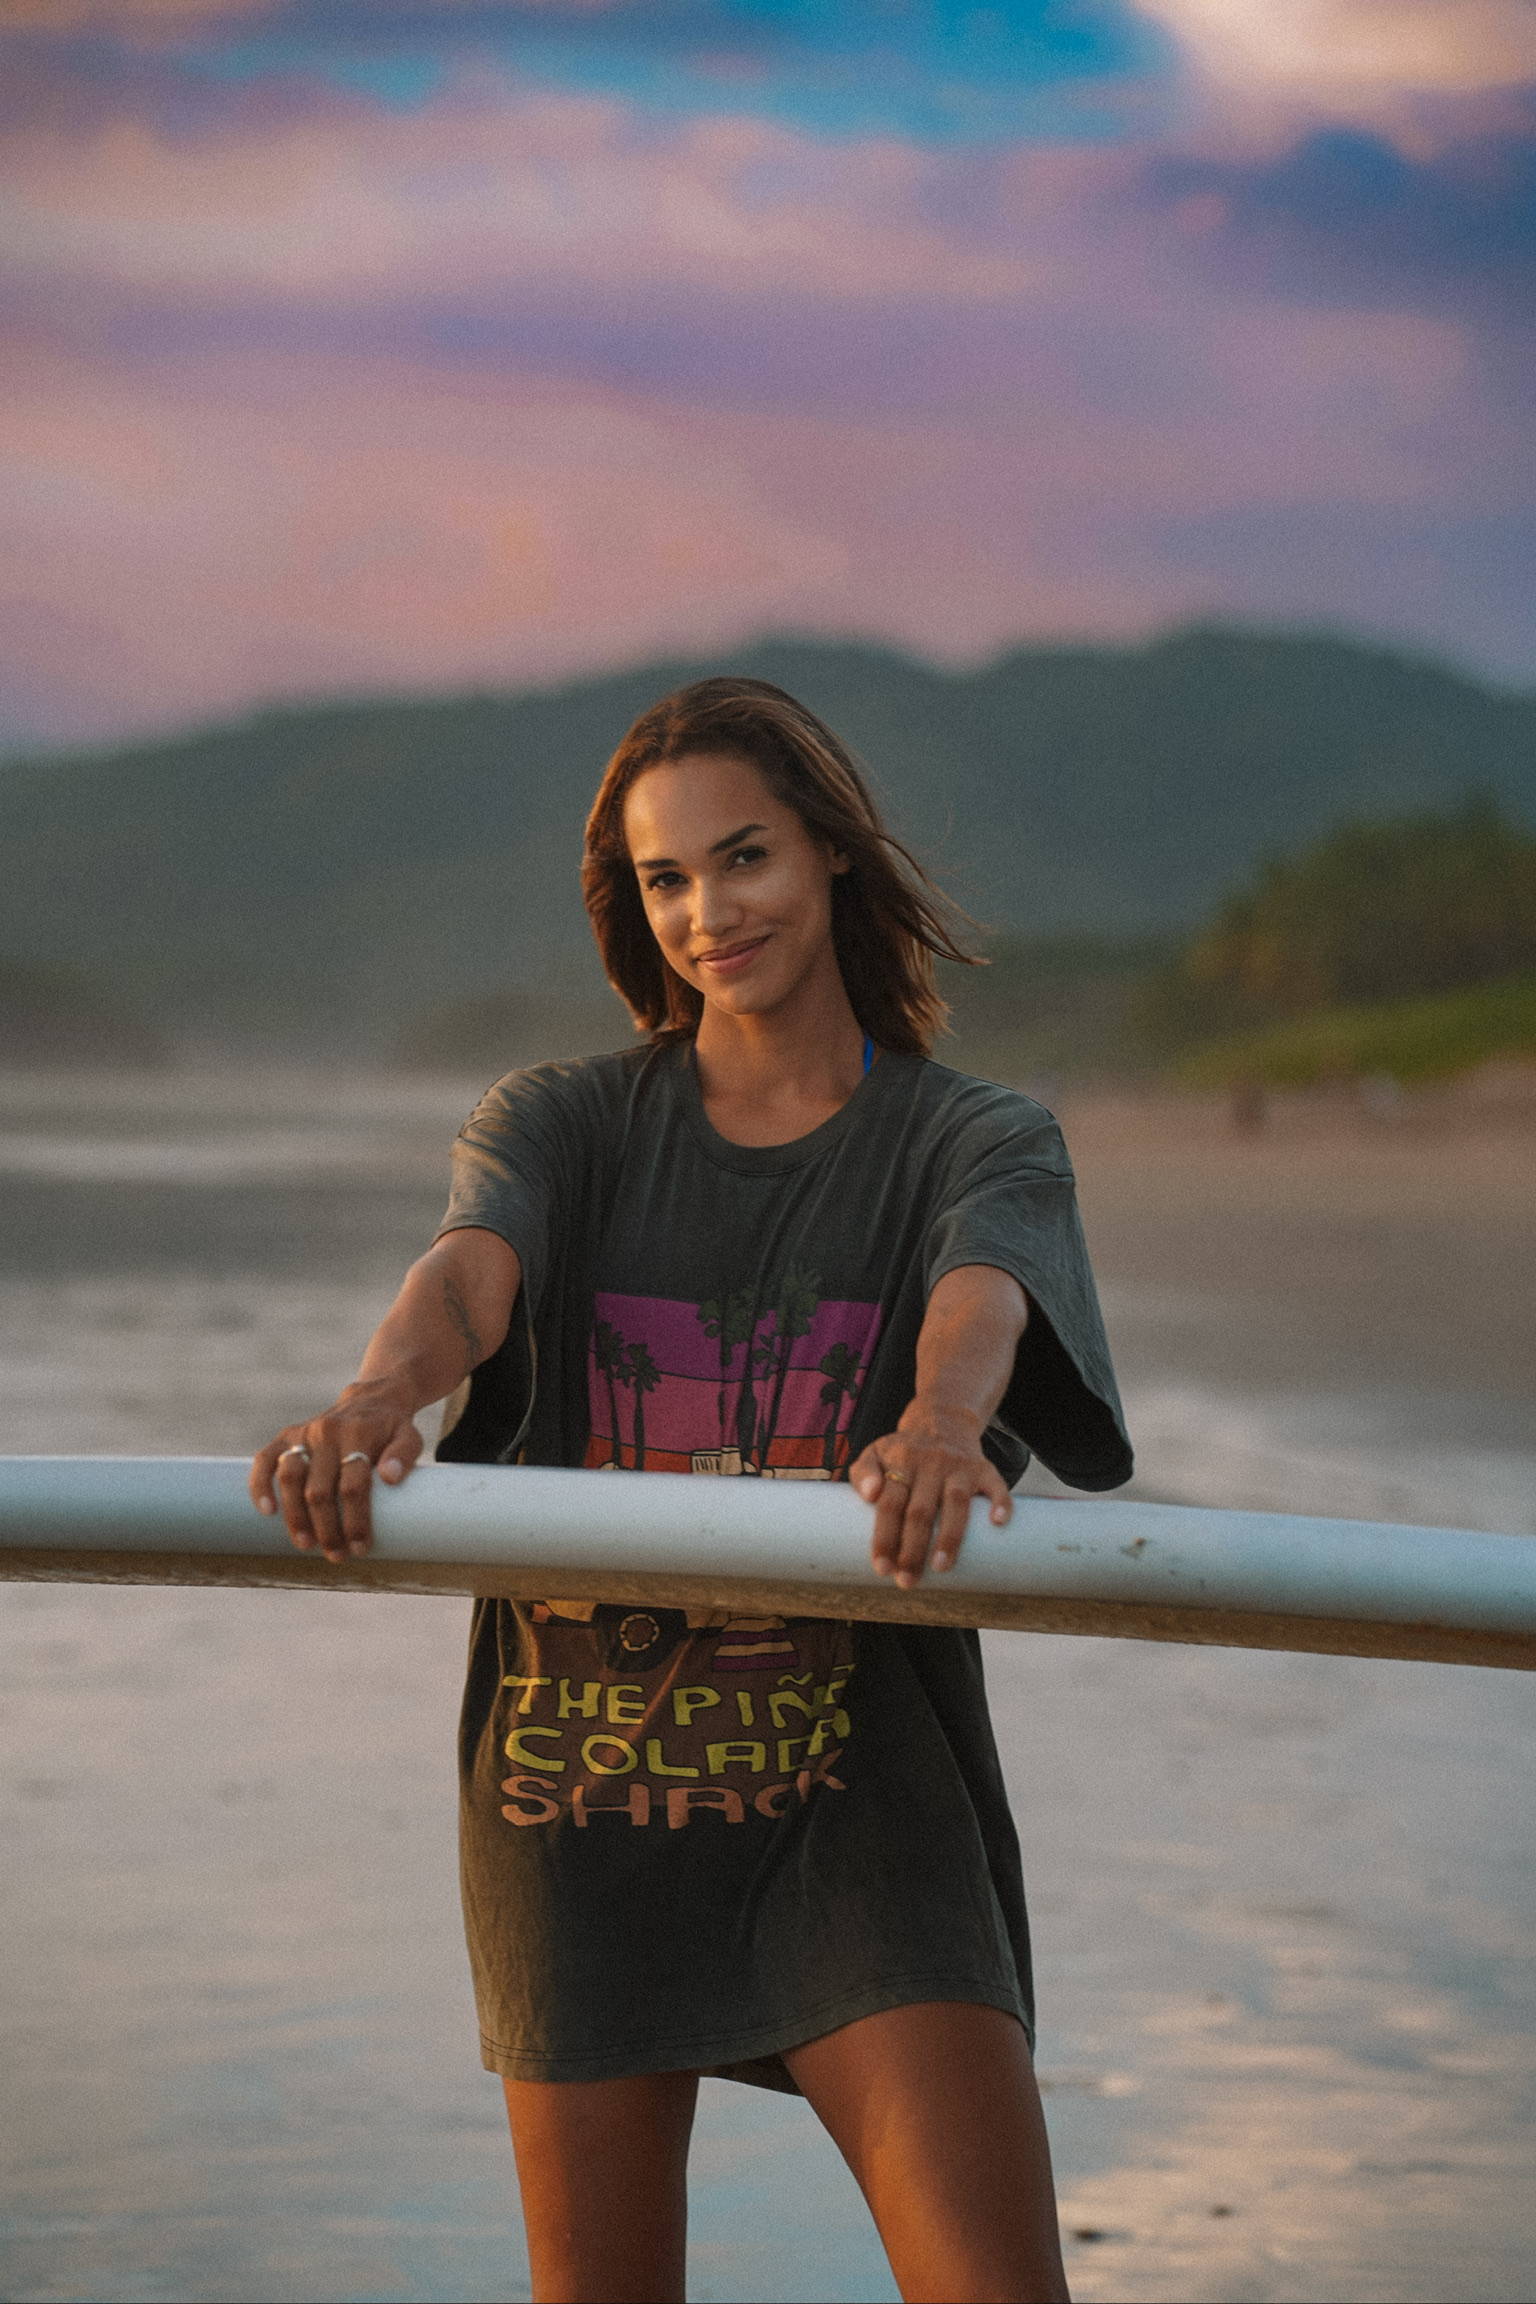 A woman wearing an oversized graphic t-shirt holding her surfboard on a beach in Costa Rica